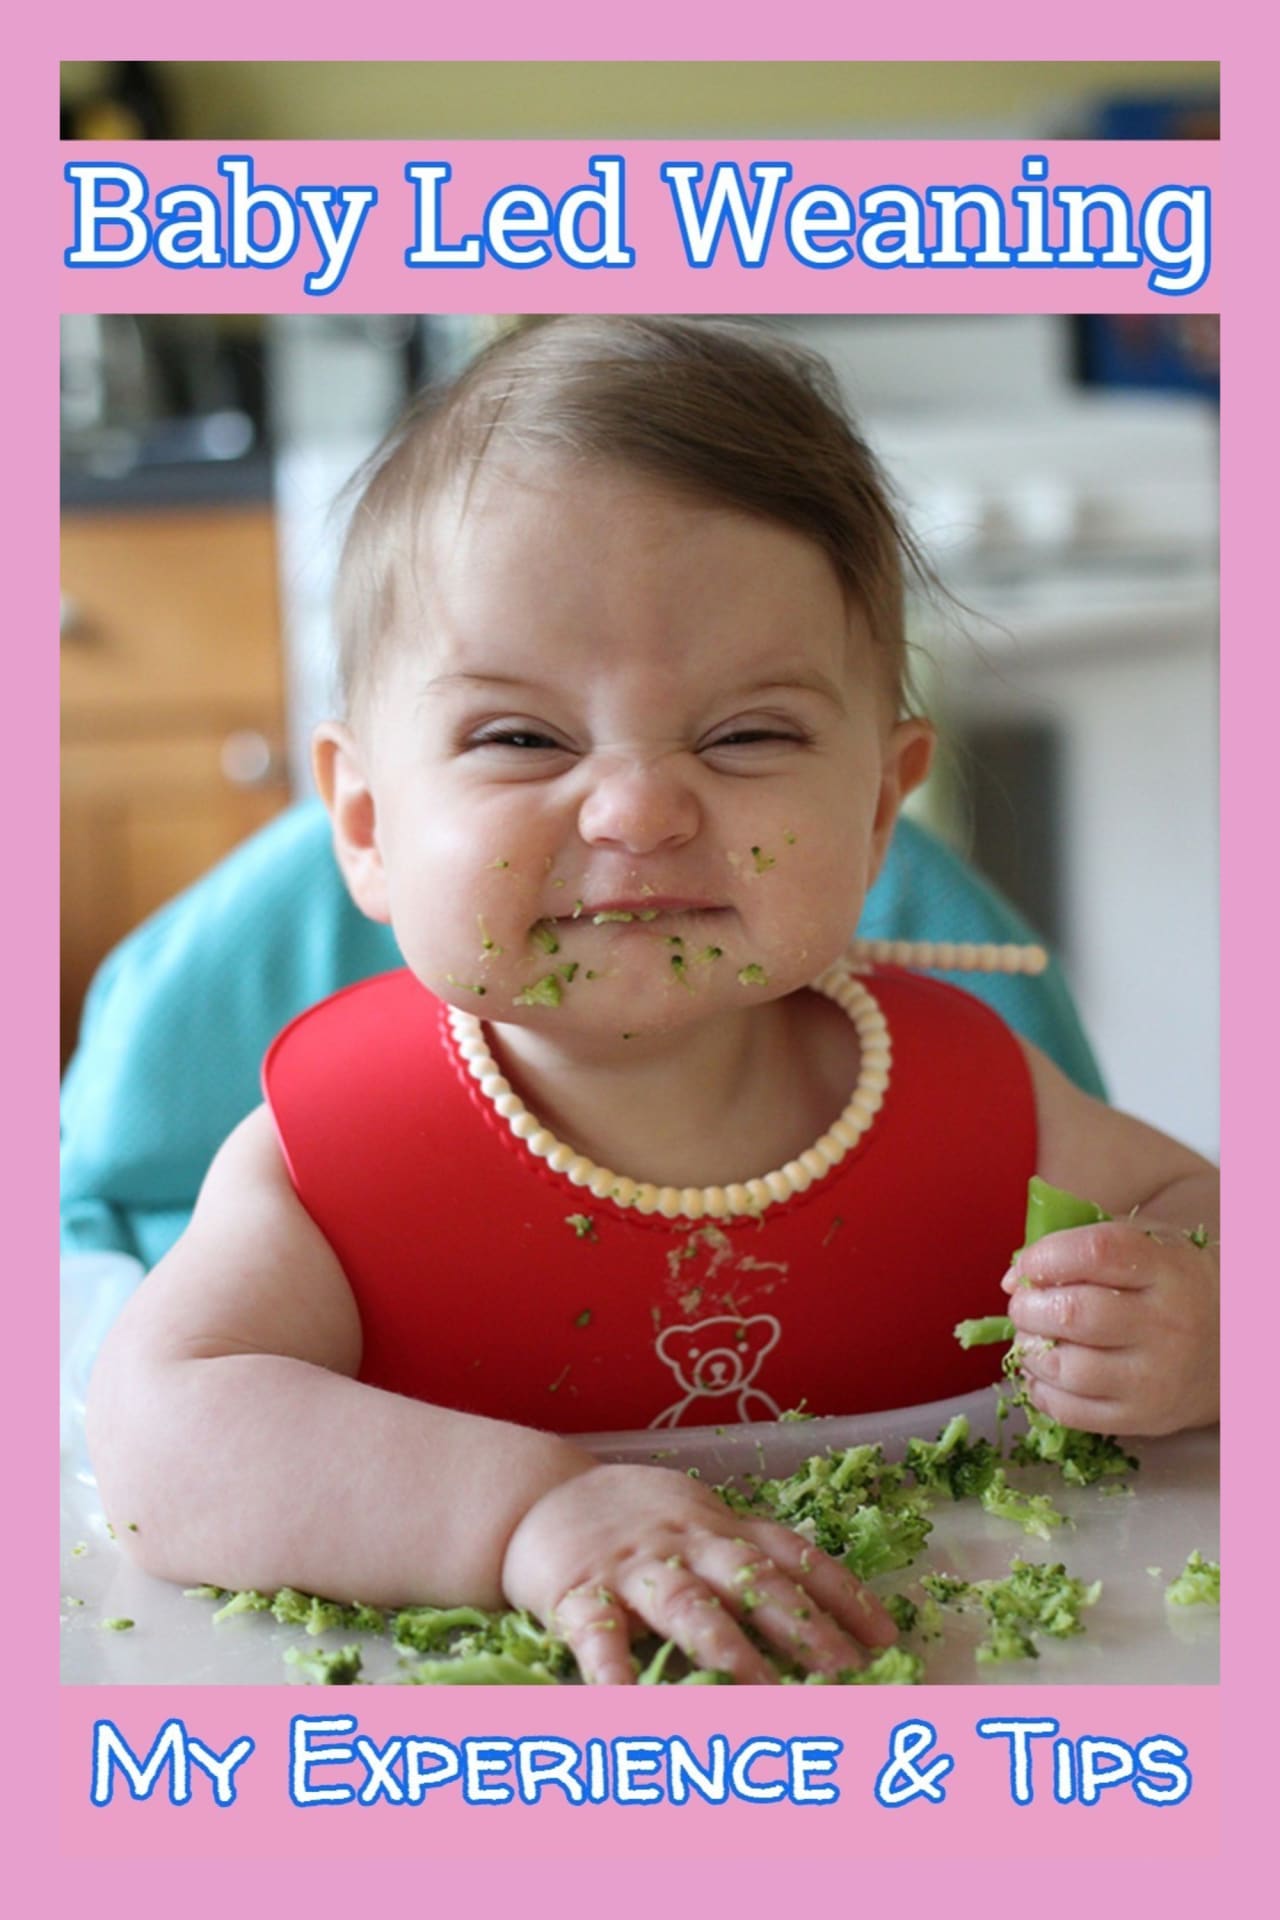 Baby Led Weaning - Introducing Solids To Baby with Baby Led Weaning – Baby led weaning first foods, recipes, rules, starting baby led weaning tips and advice and so much more!